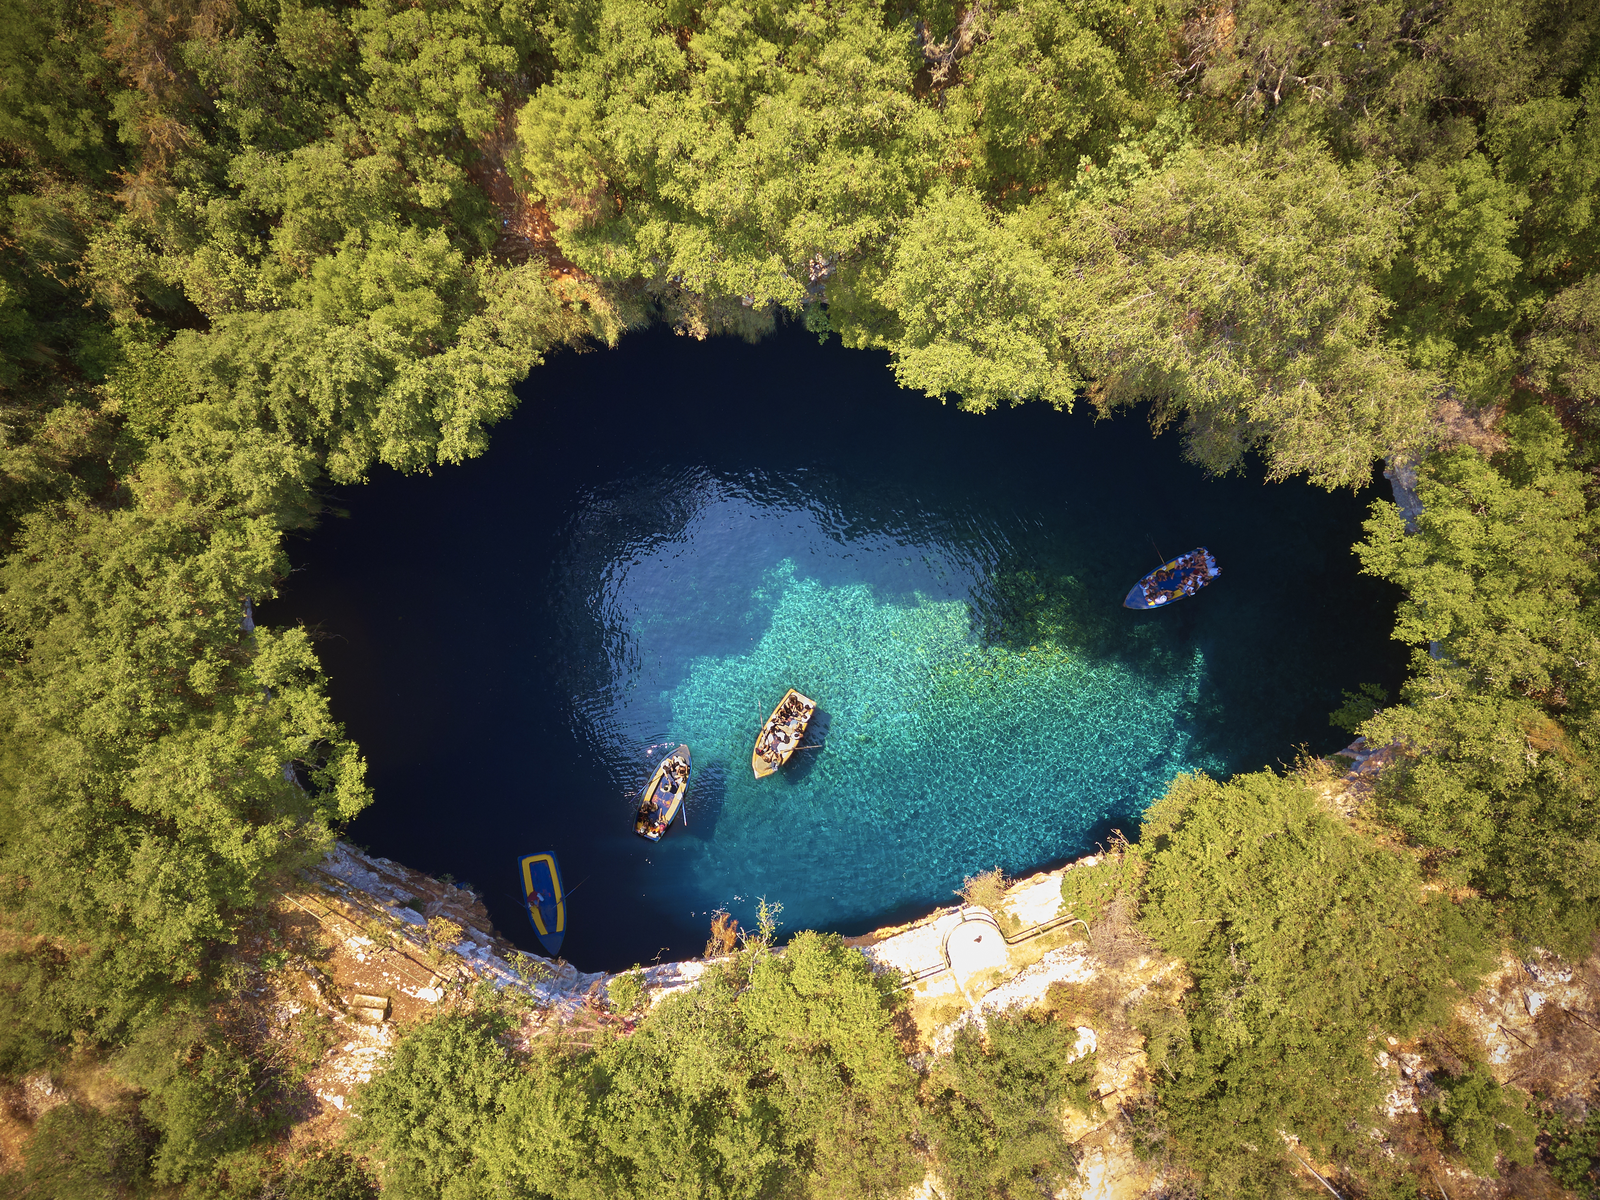 Overhead view on four boats hovering at Melissani Cave ( Melissani Lake) near Sami village in Kefalonia island, a notable place and one of the best places to visit in Greece, with its crater surrounded by lush forest